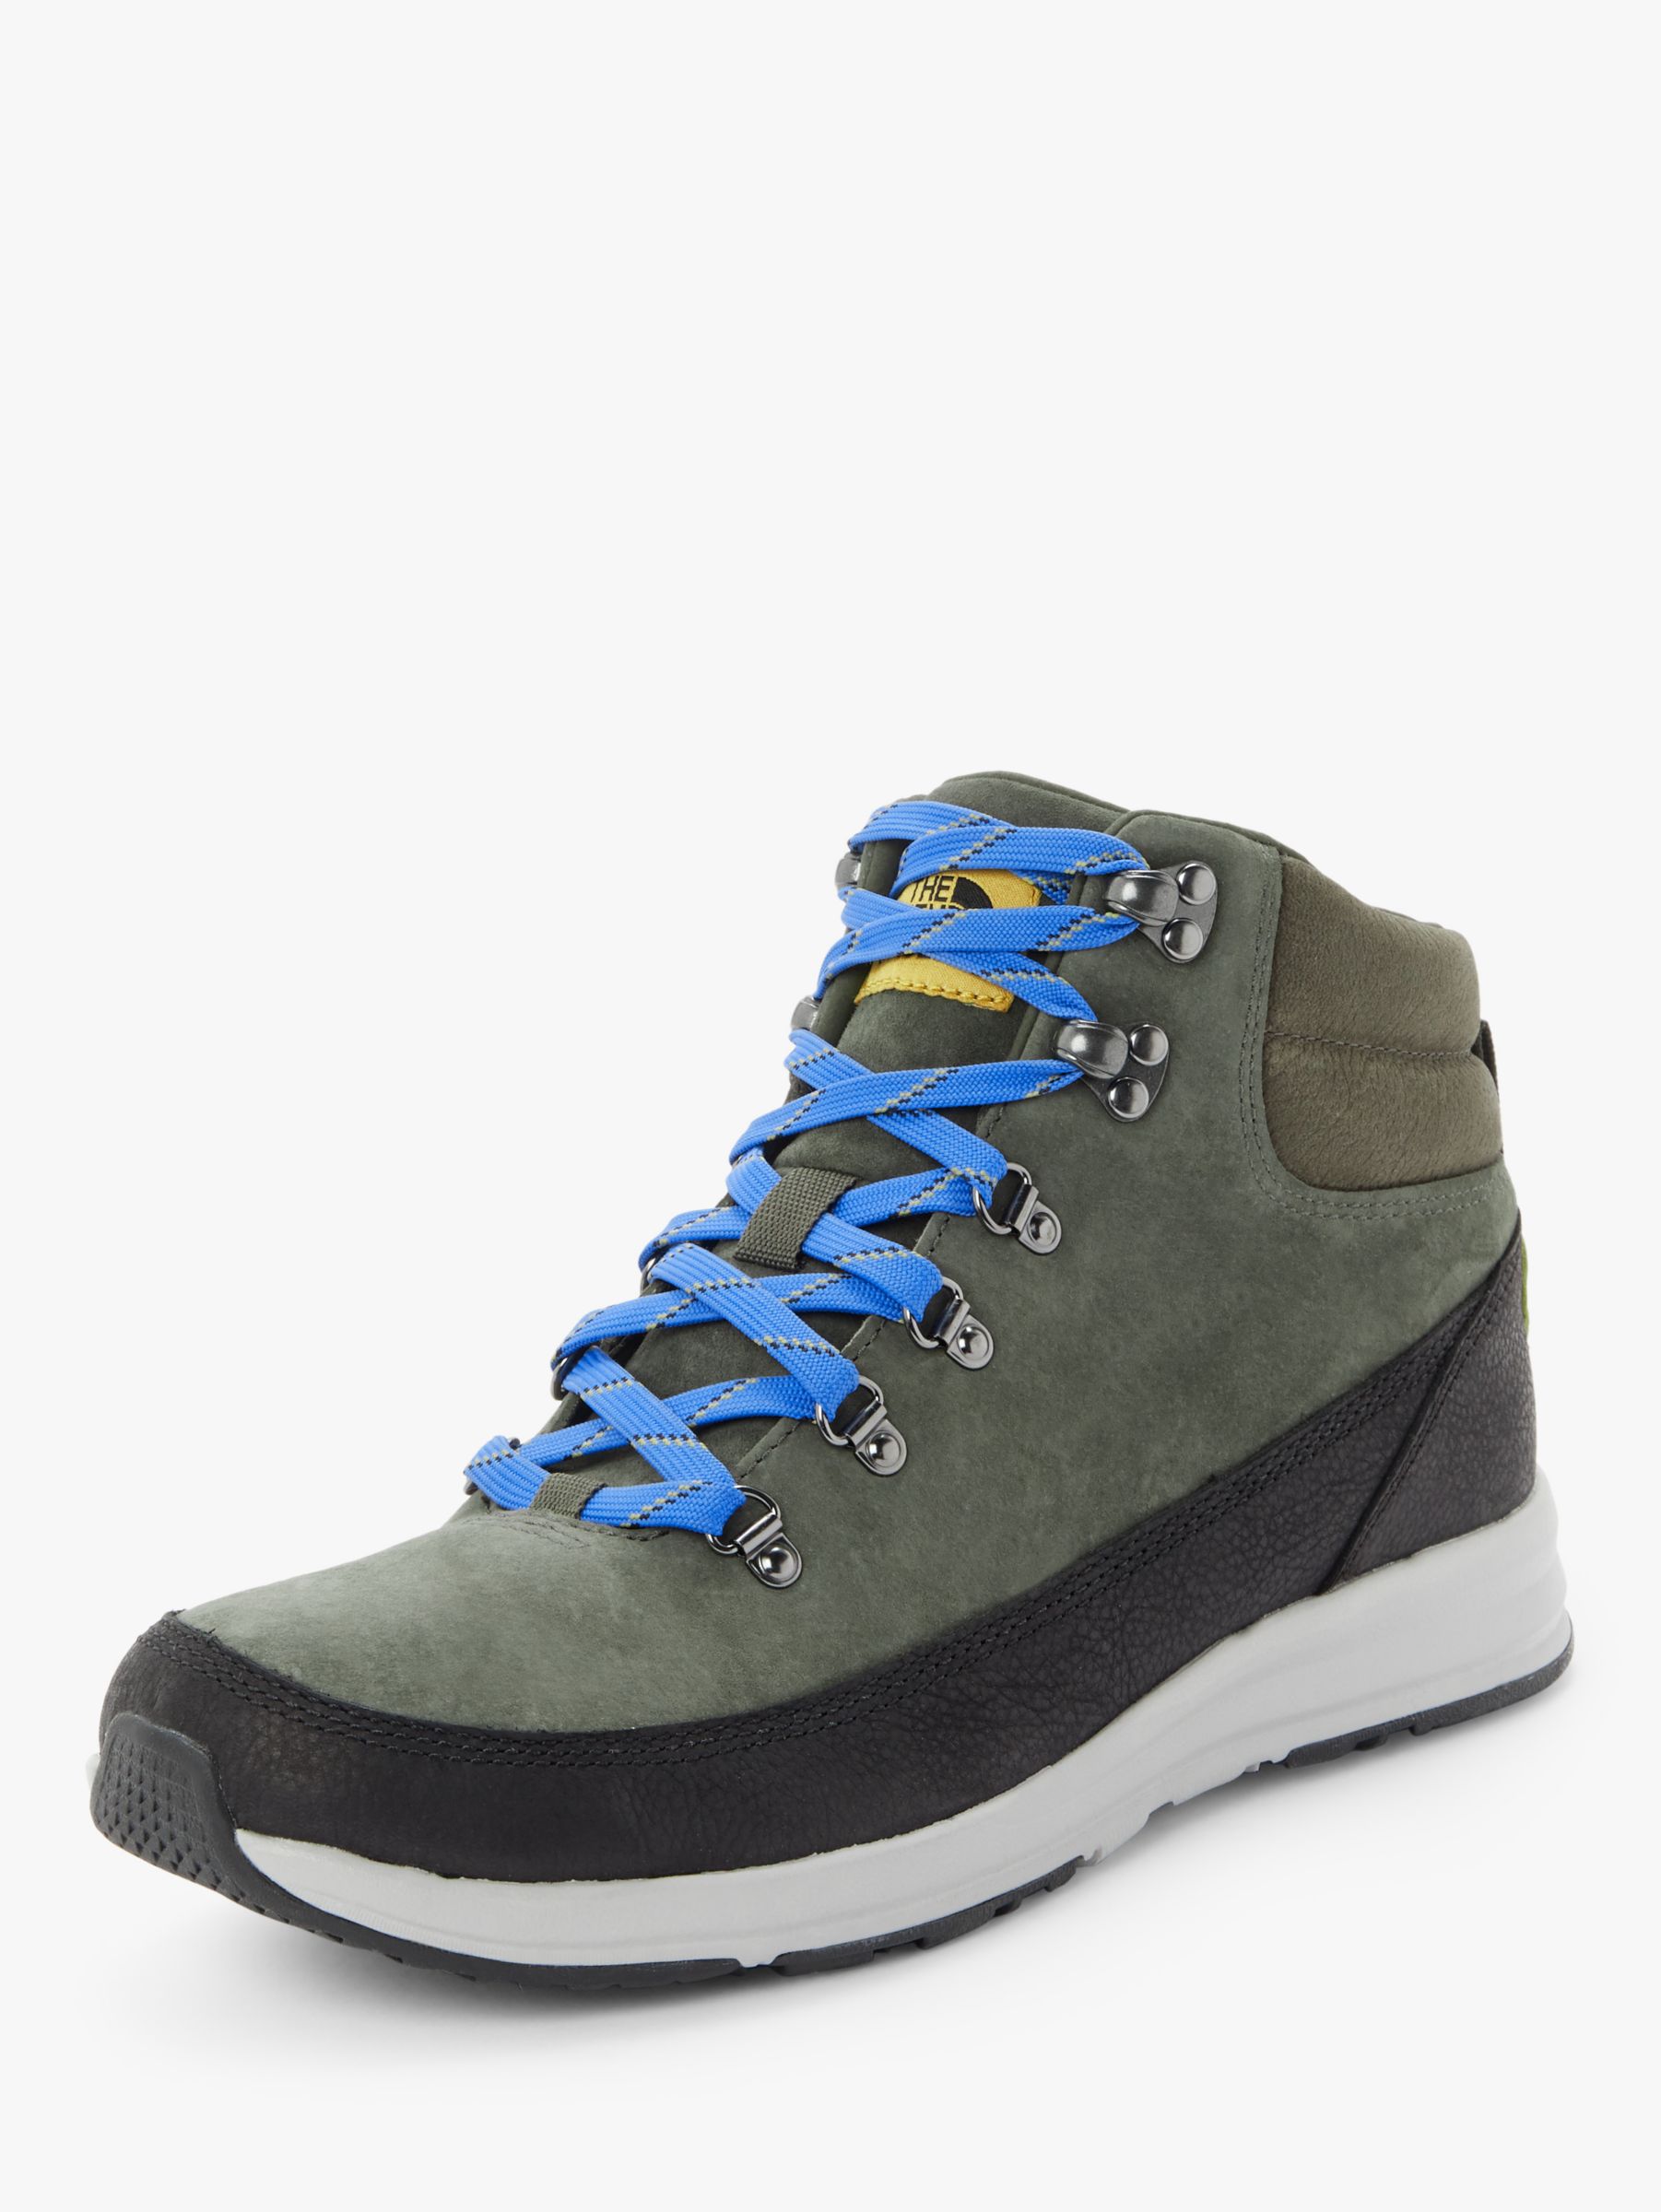 north face boots green